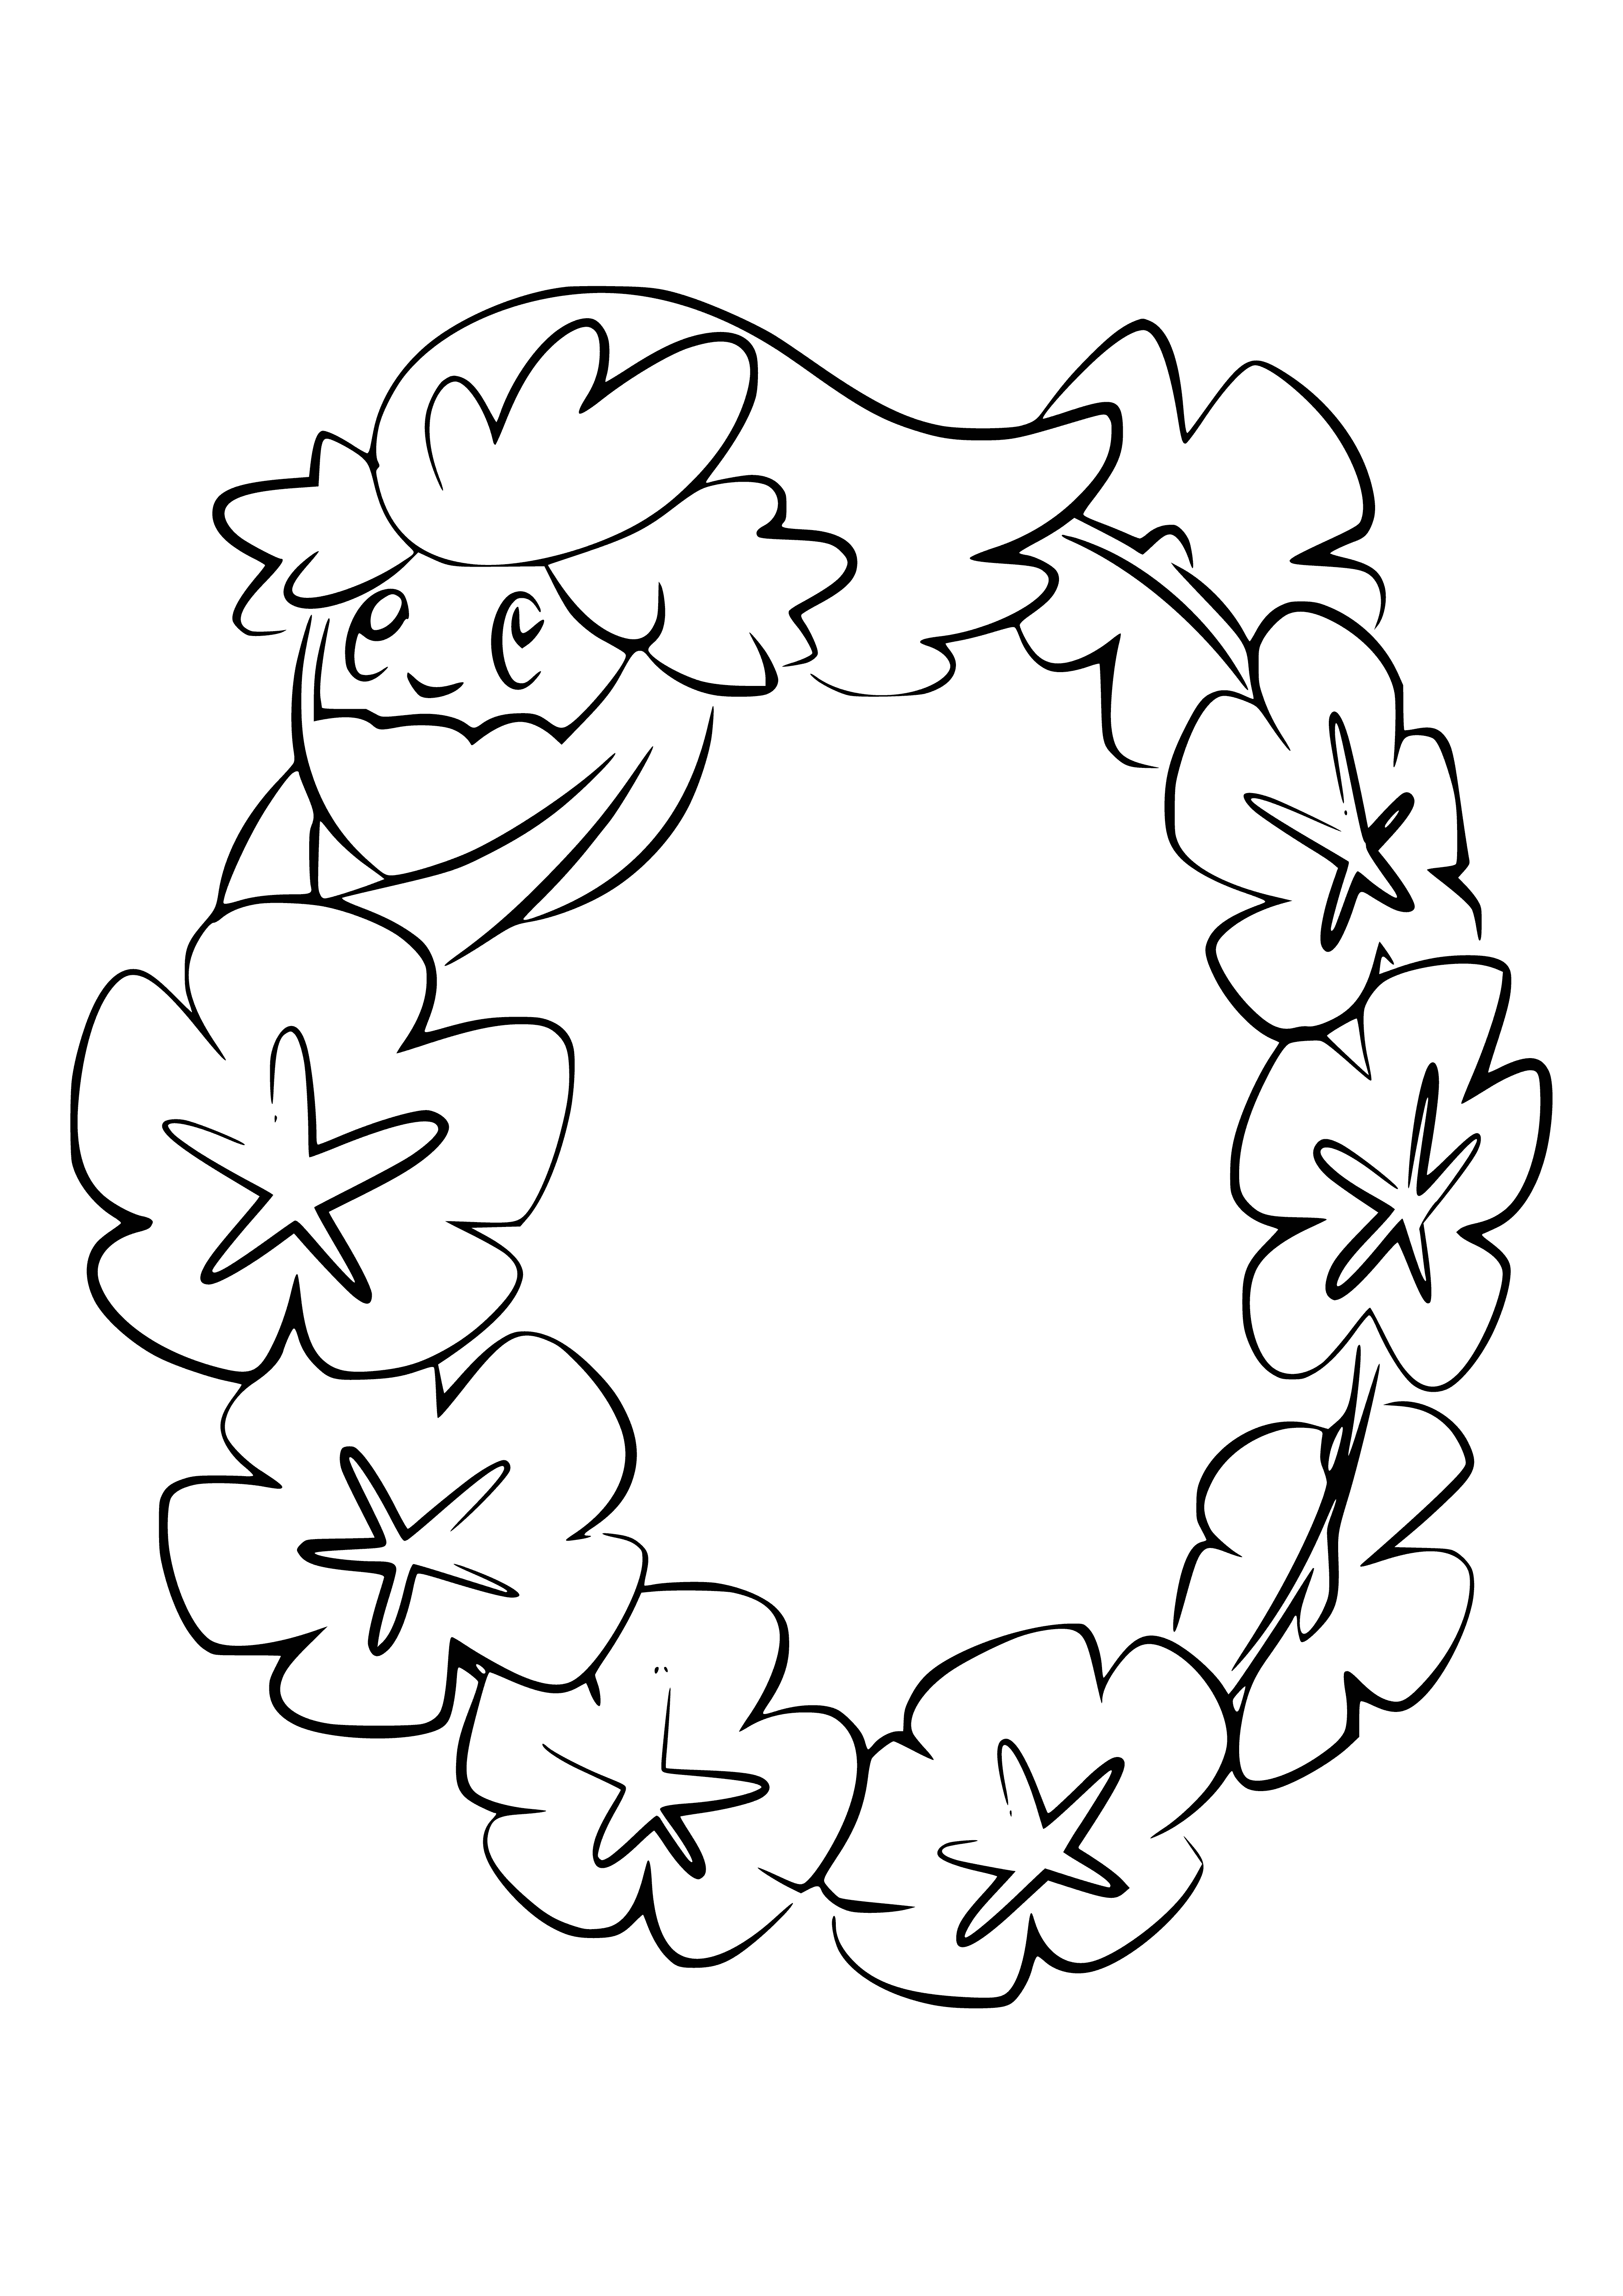 coloring page: Pokemon w/ cream color, red forehead mark, long red tail w/ blue gem, small wings & two red flowers on its head.